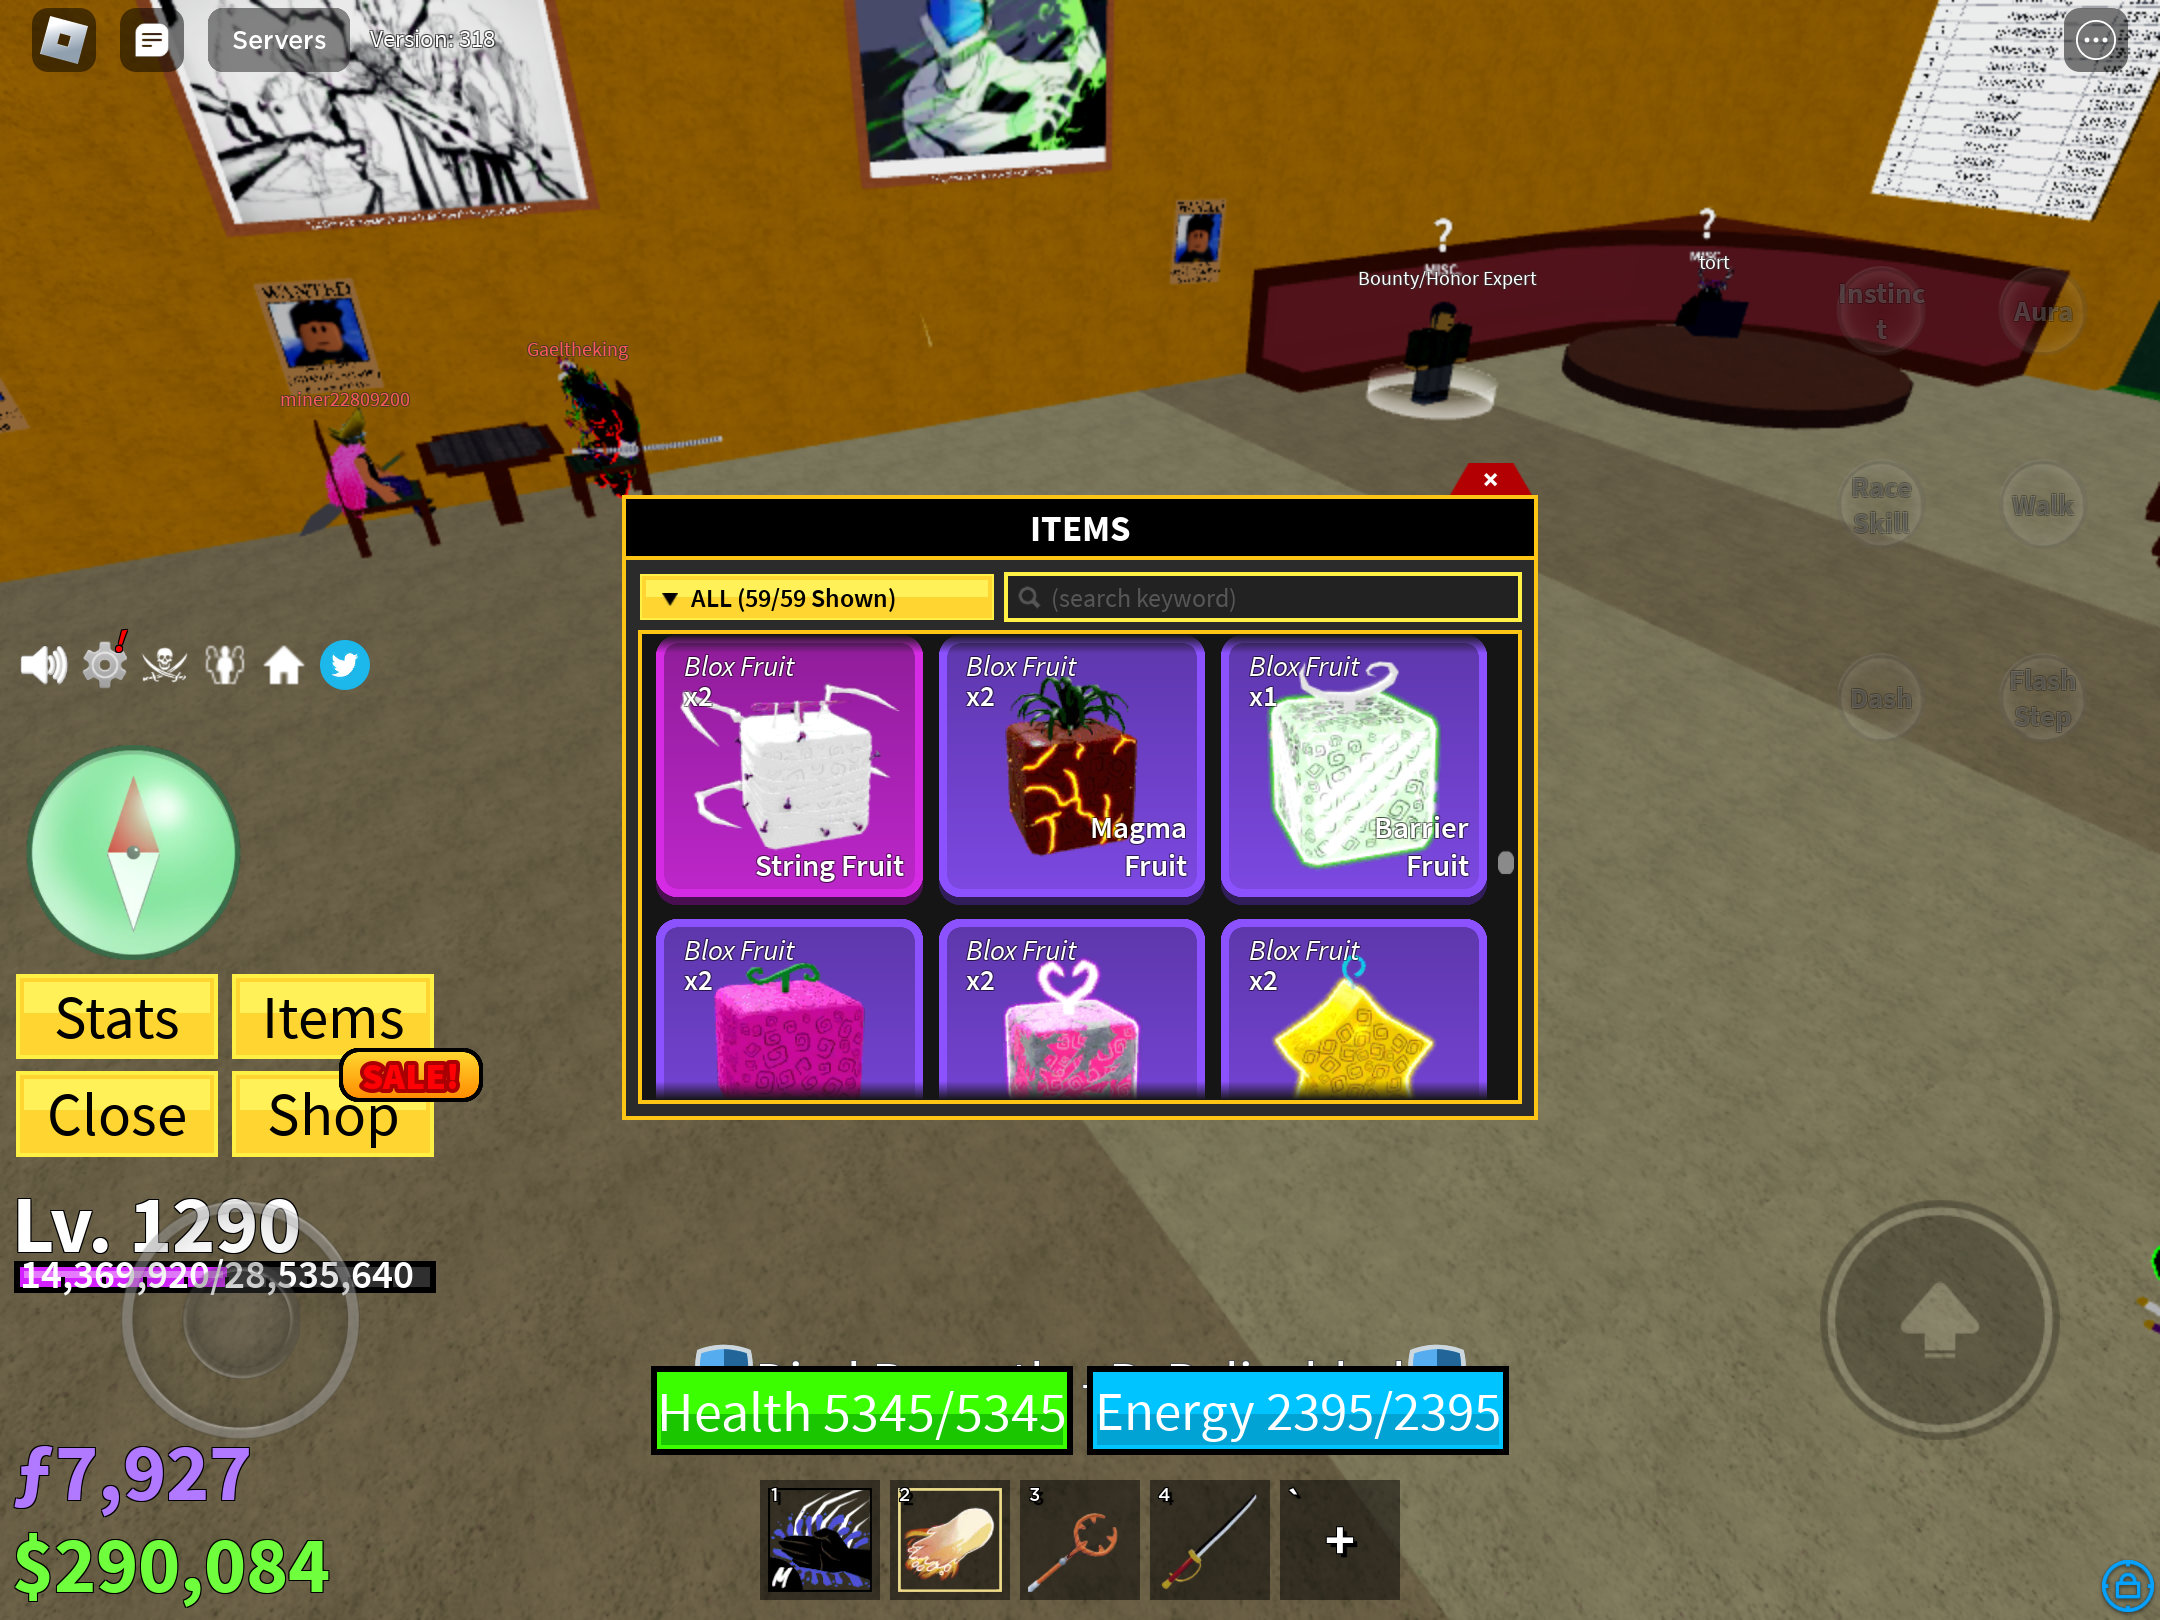 how good is blizzard in blox fruits